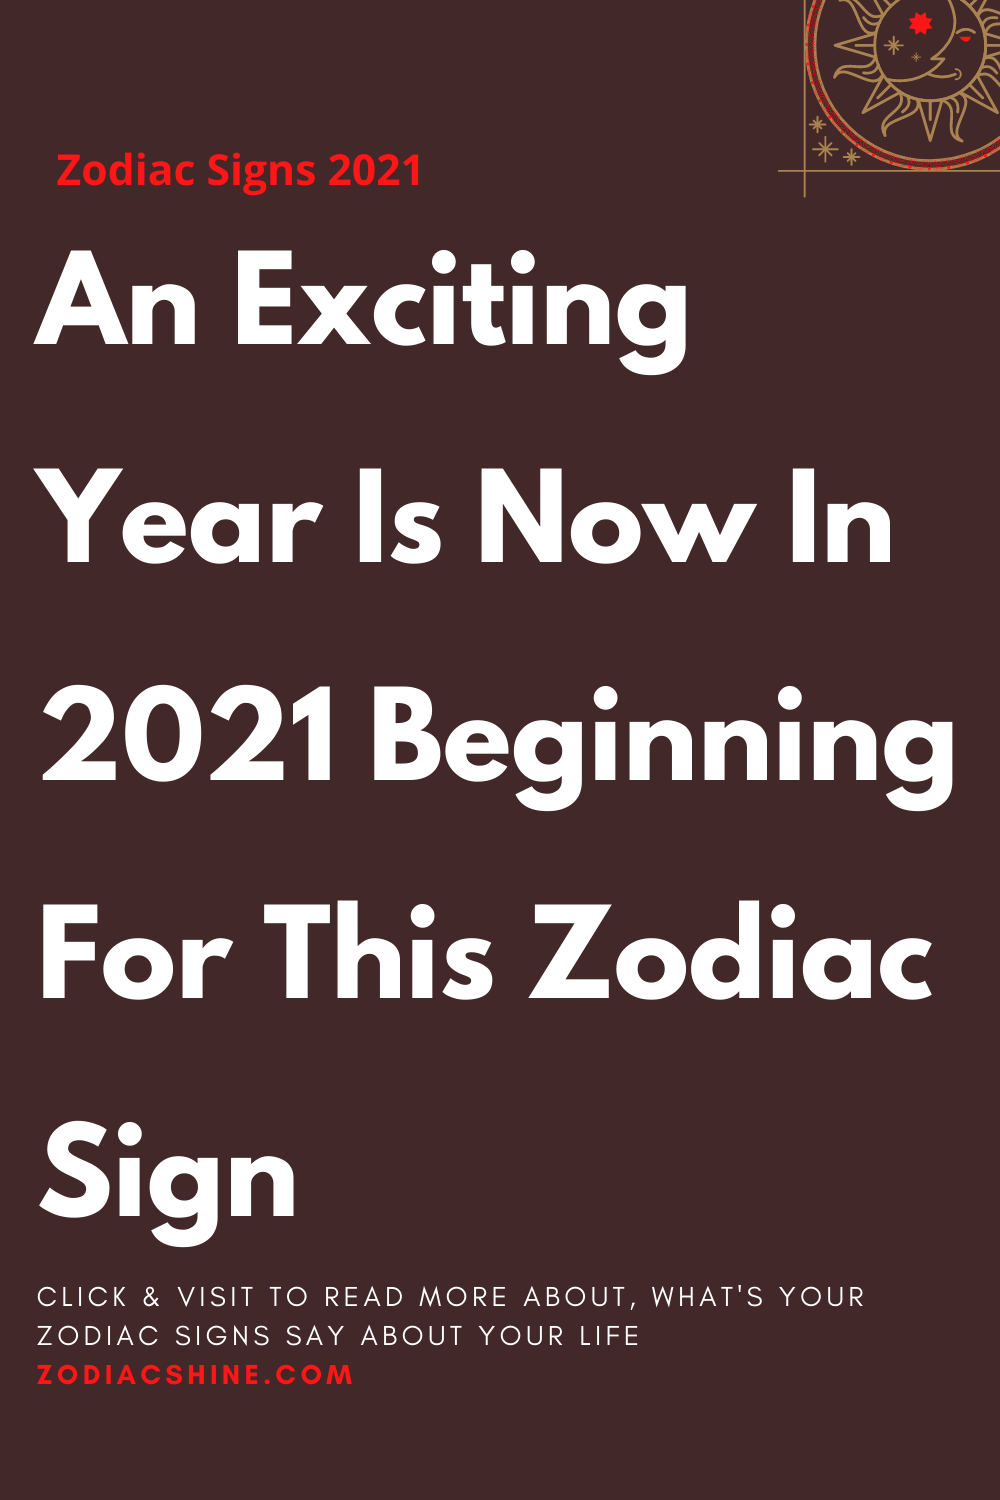 An Exciting Year Is Now In 2021 Beginning For This Zodiac Sign – Zodiac ...